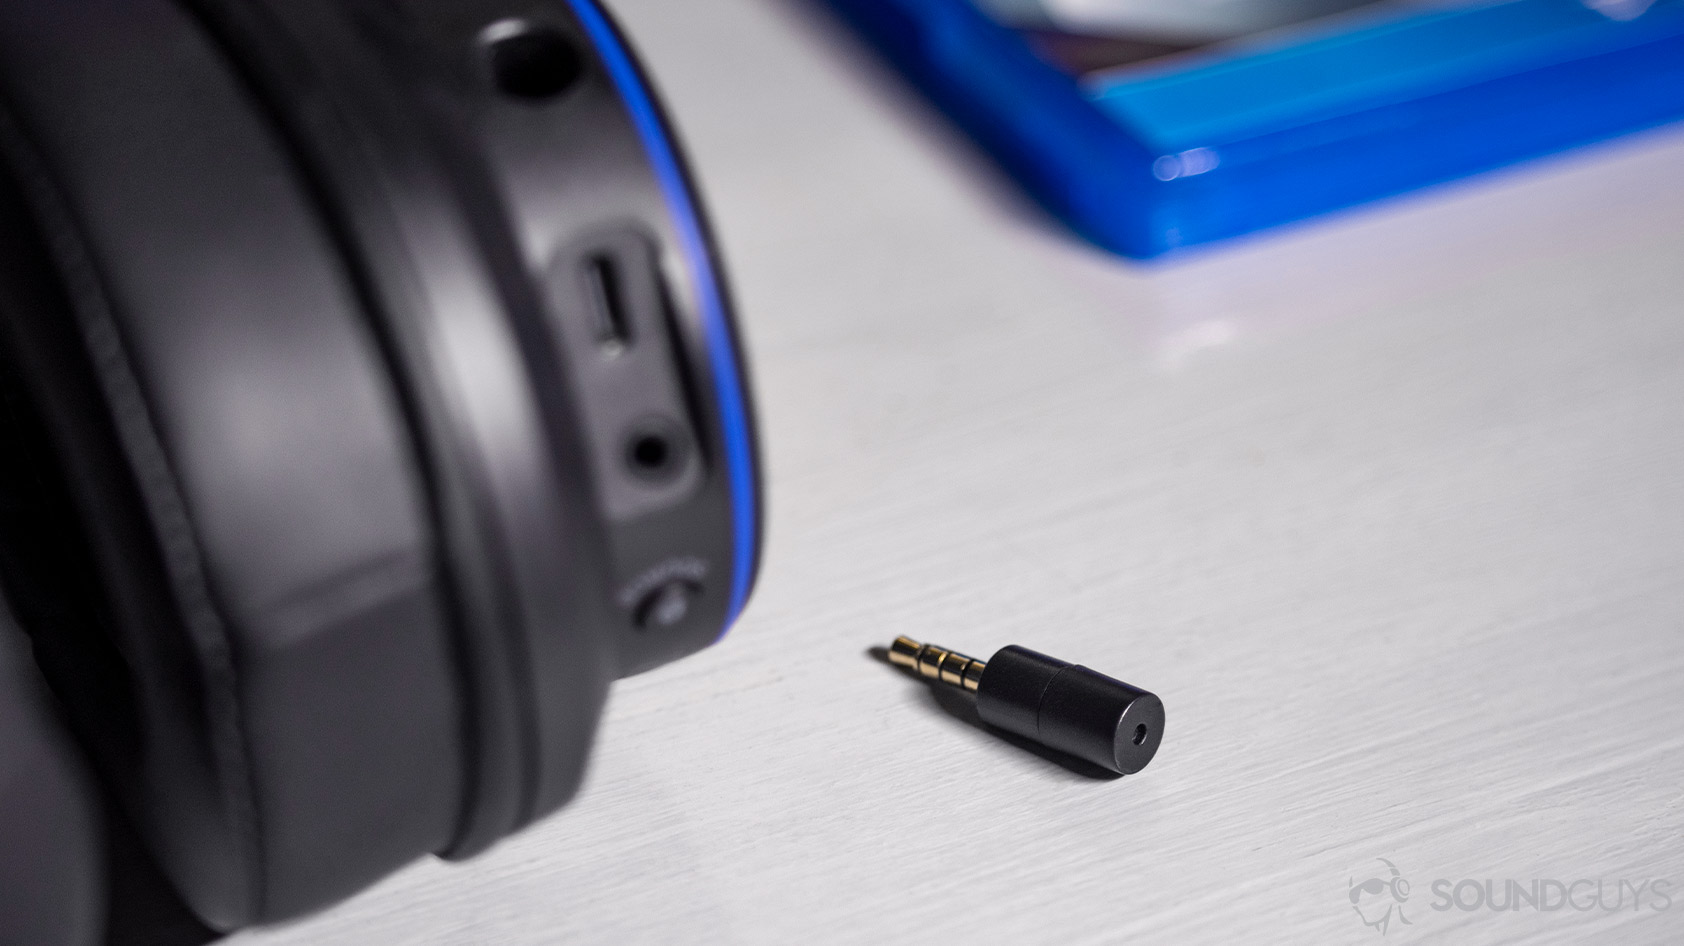 Creative SXFI Air: Close-up of the NanoBoom mic removed from the headset.